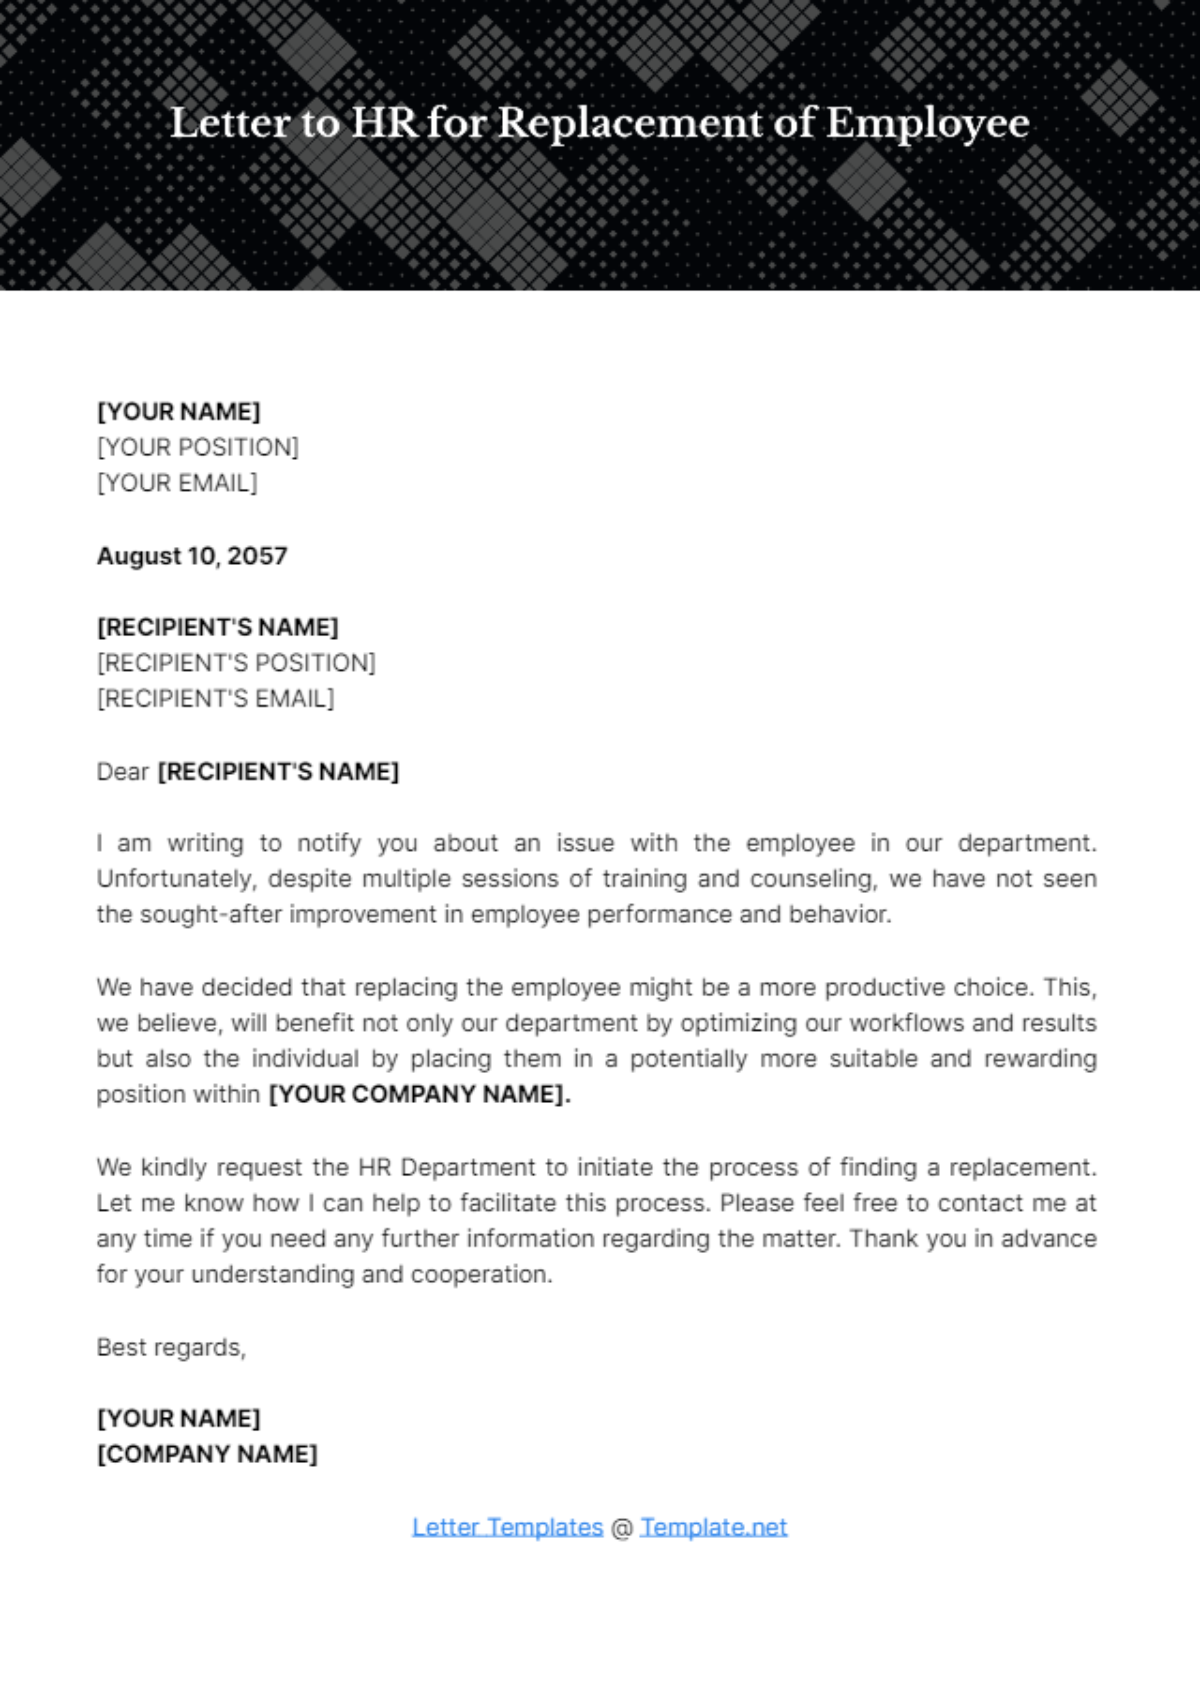 Free Letter to HR for Replacement of Employee Template